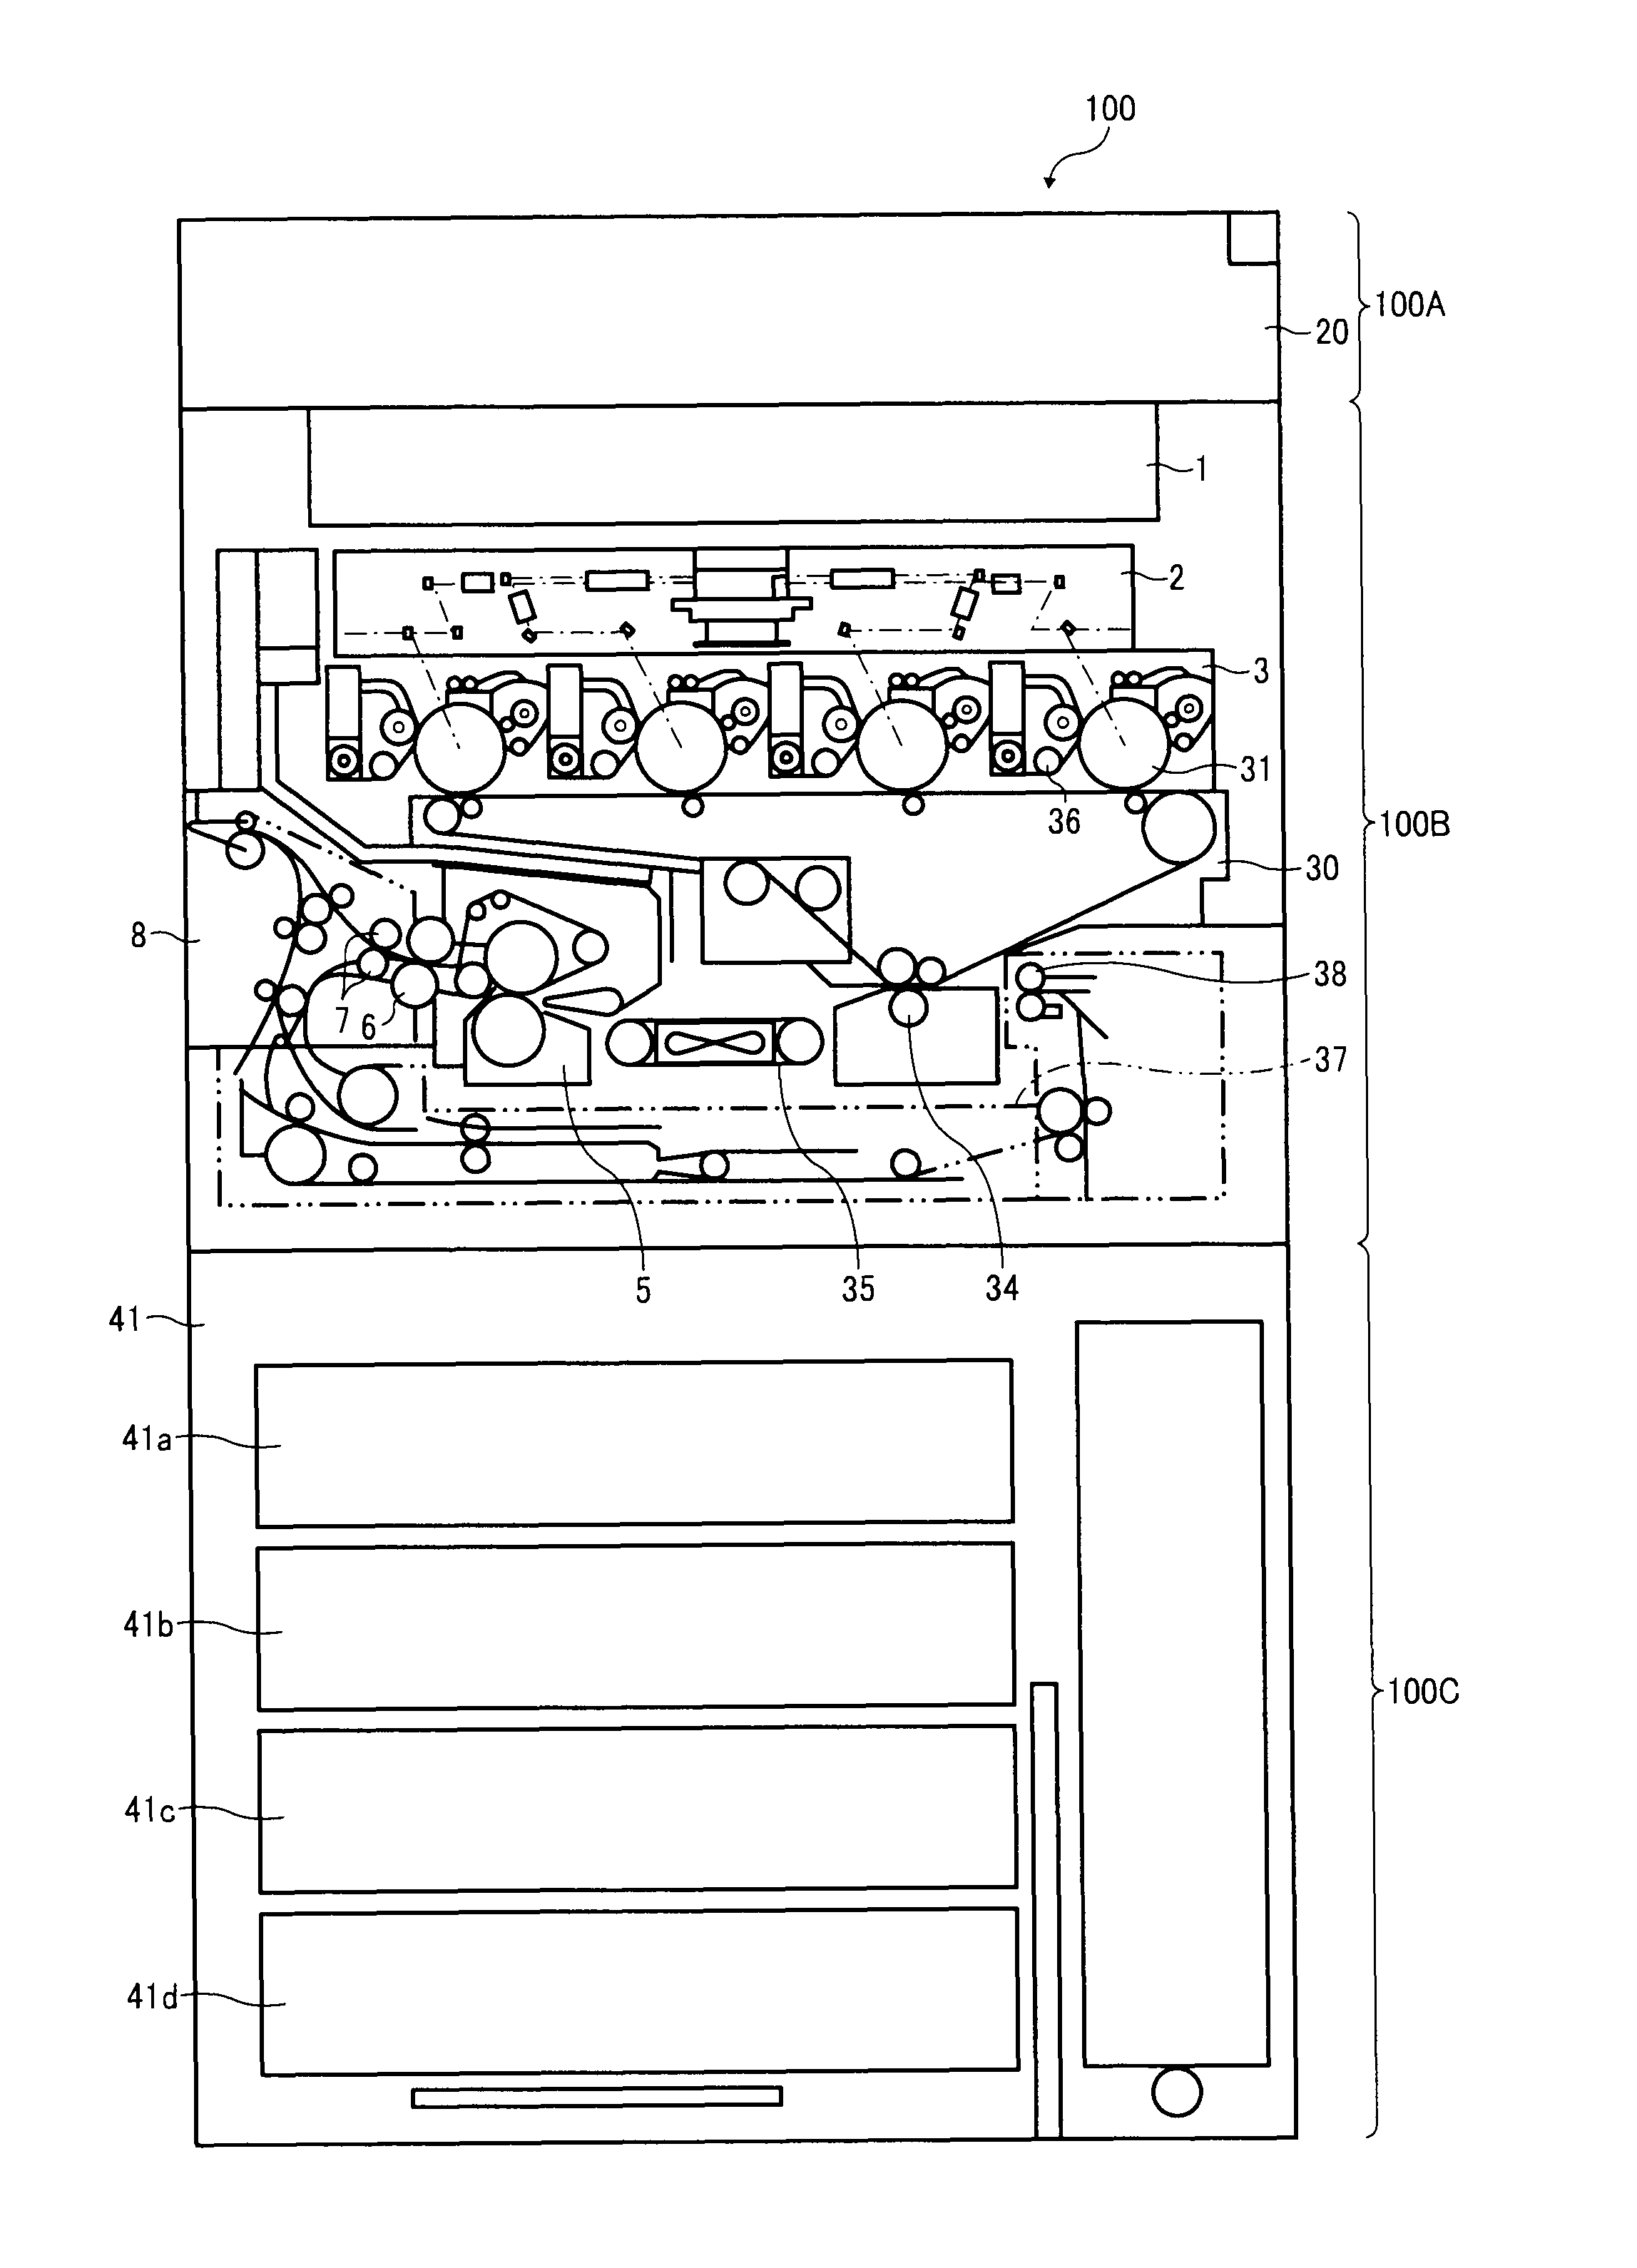 Toner for forming images, one-component developer, two-component developer, image forming method, image forming apparatus and process cartridge